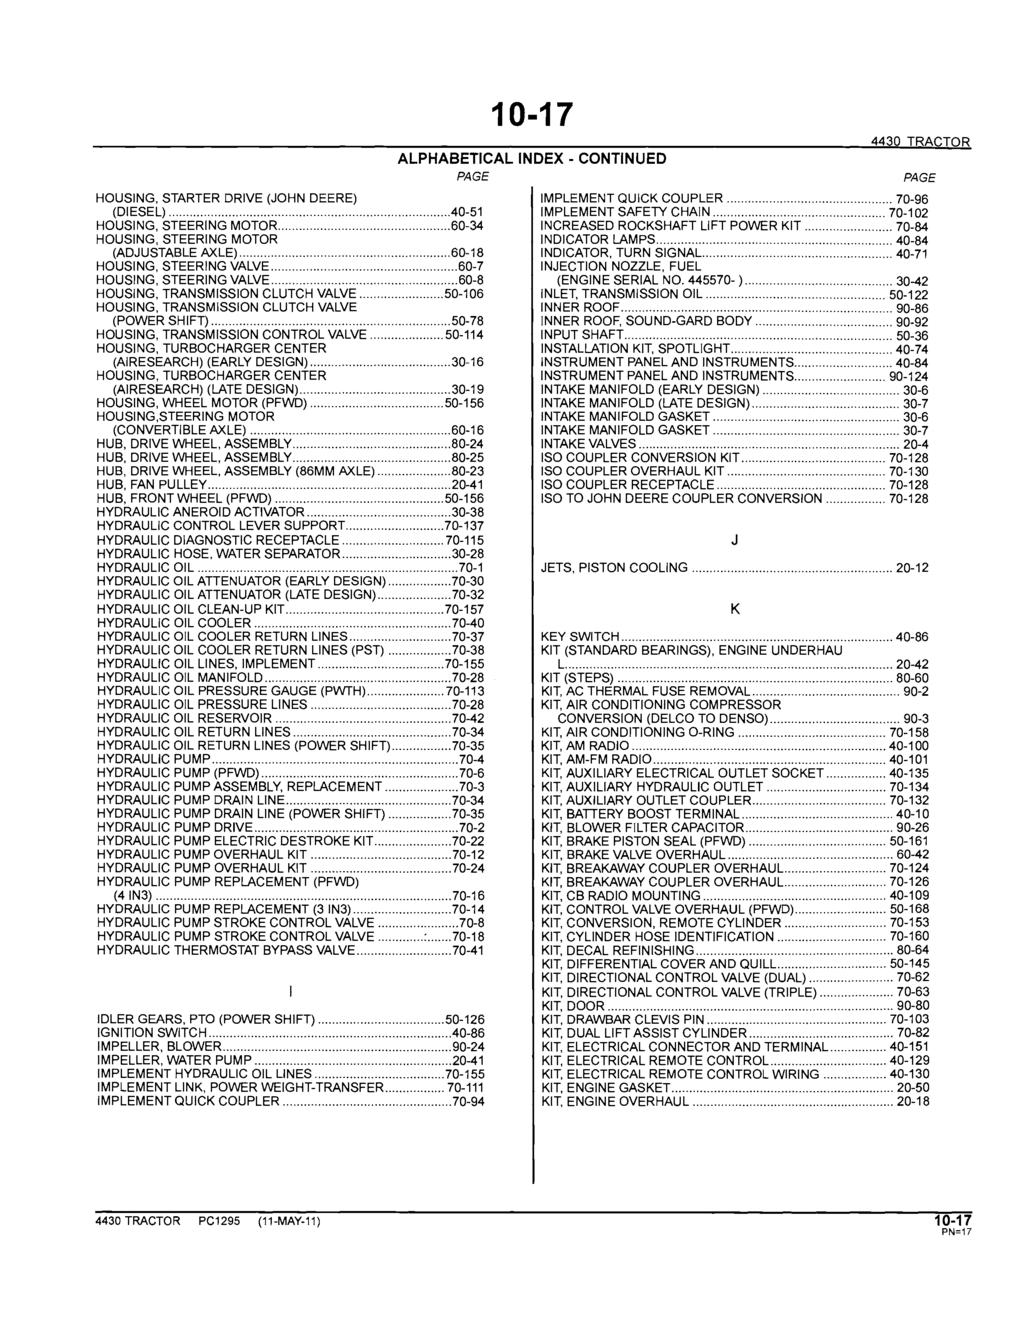 10-17 ALPHABETICAL INDEX - CONTINUED PAGE 4430 TRACTOR HOUSING, STARTER DRIVE (JOHN DEERE) IMPLEMENT QUICK COUPLER... 70-96 (DIESEL)...40-51 IMPLEMENT SAFETY CHAIN... 70-102 HOUSING, STEERING MOTOR.